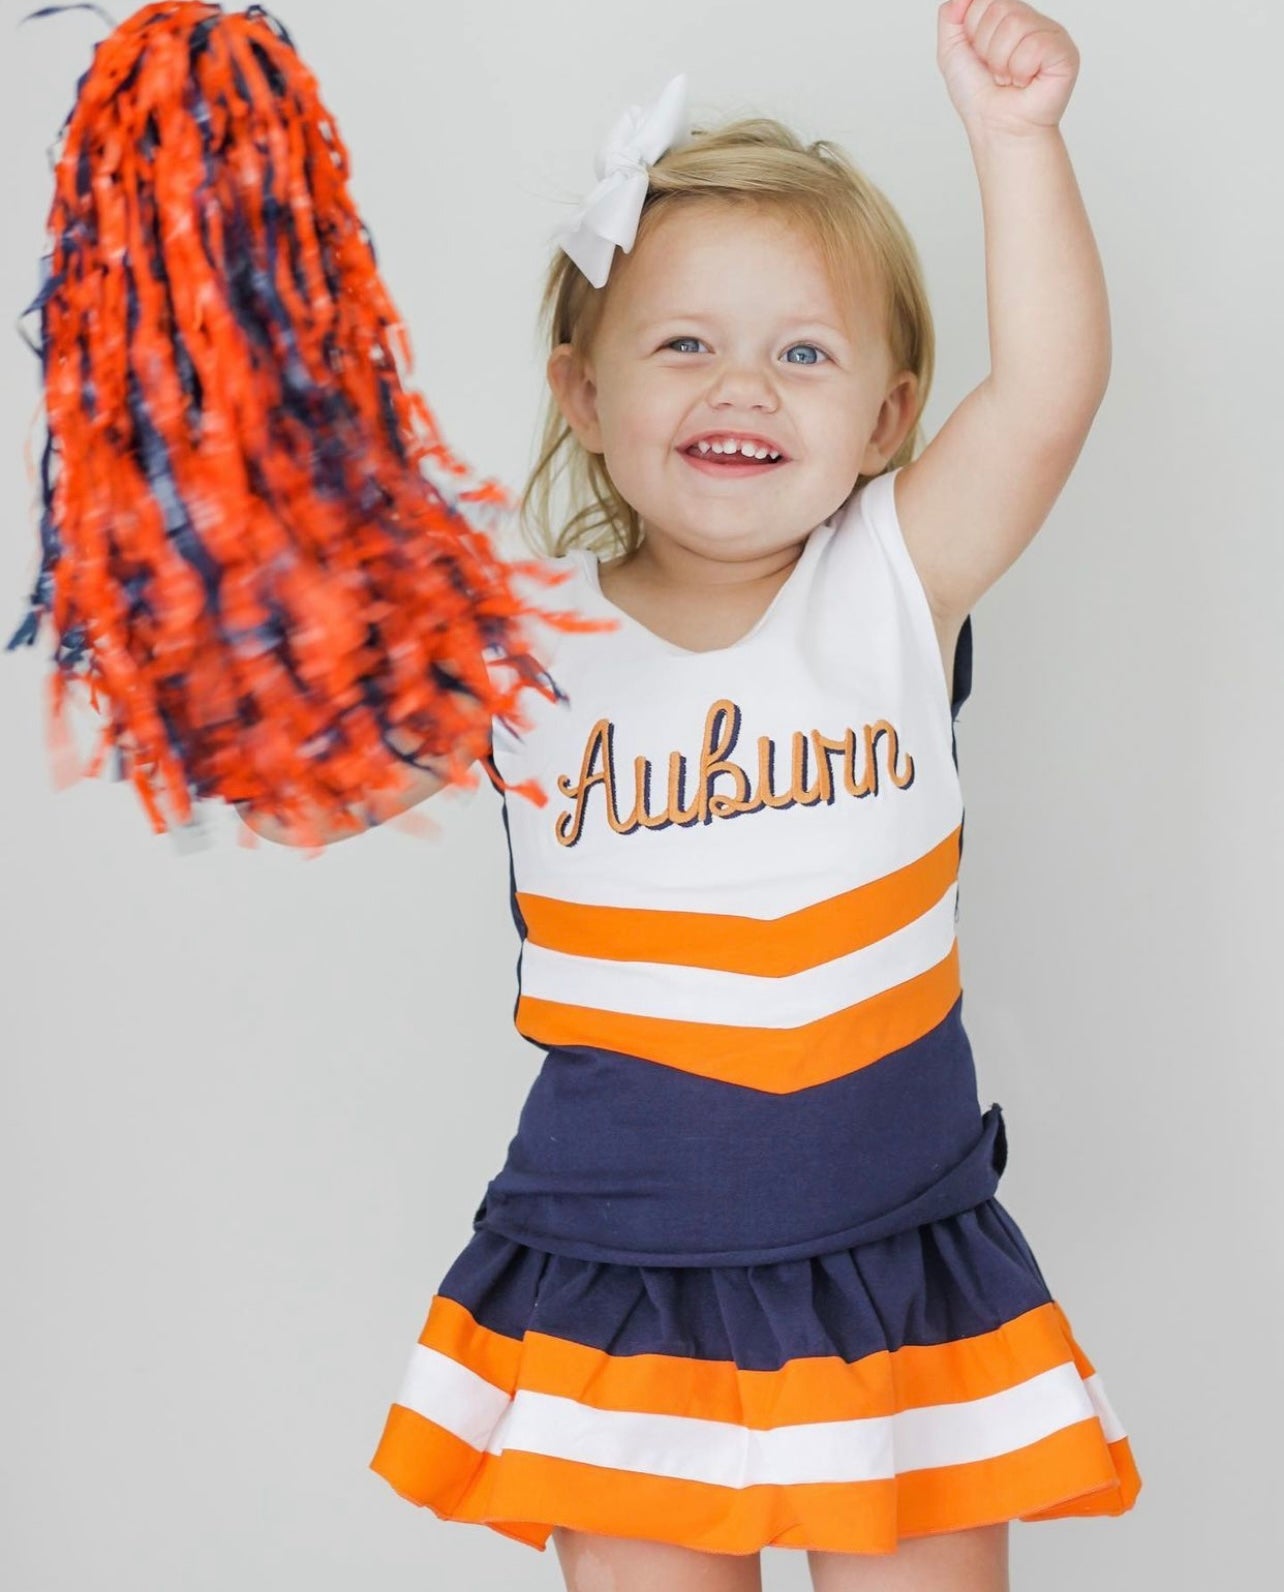 #11—Navy Blue/Orange/White Cheer Outfit